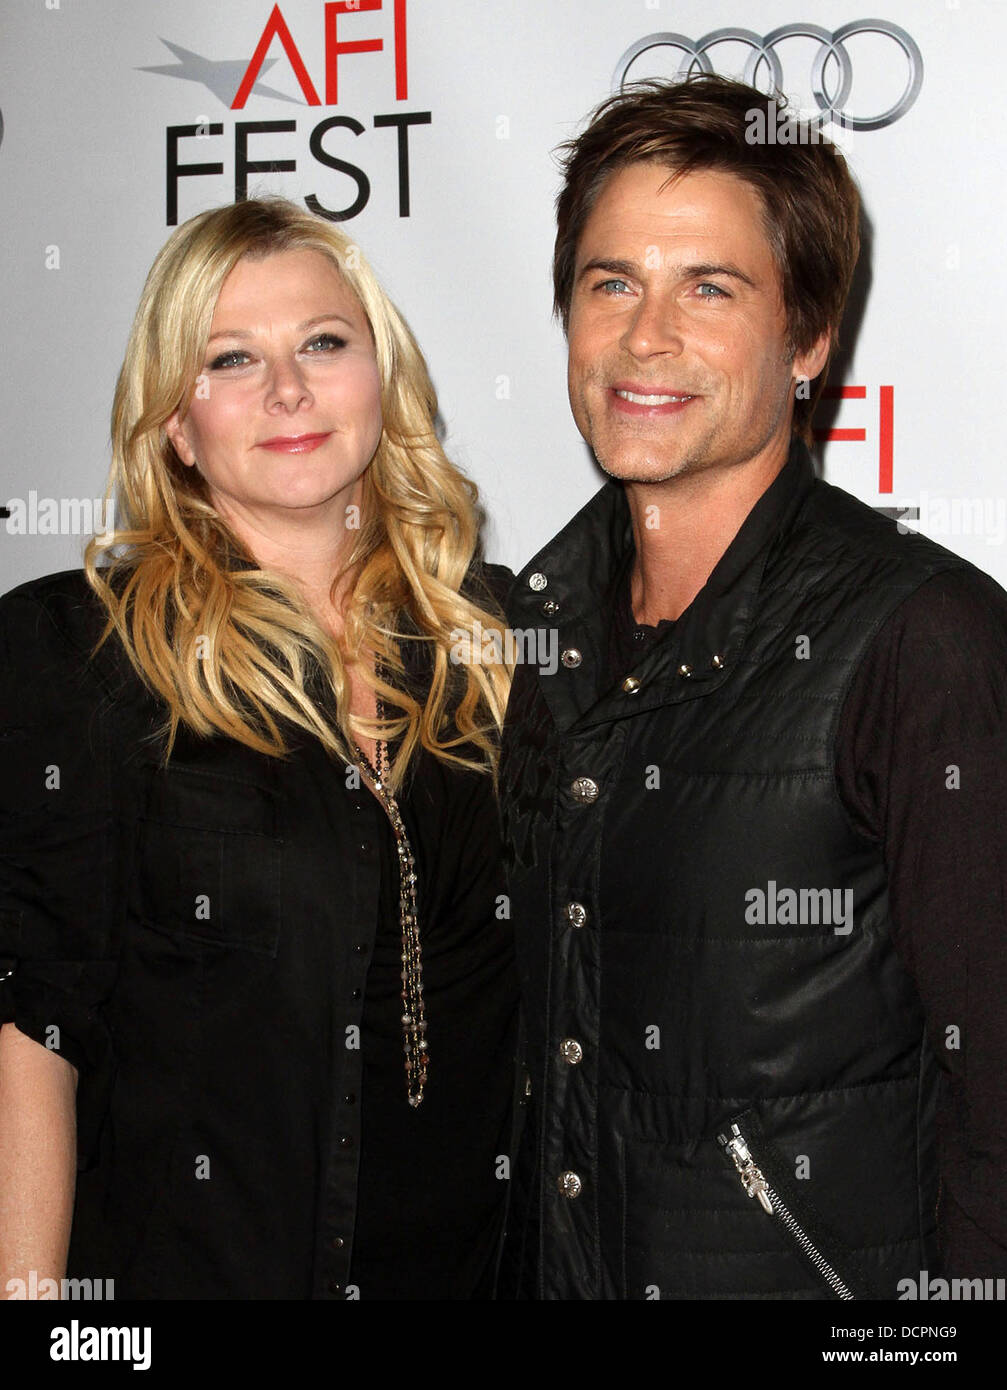 Sheryl Berkoff and Rob Lowe AFI Fest 2011 Premiere of 'I Melt With You' held at the Egyptian Theatre Hollywood, California - 07.11.11 Stock Photo